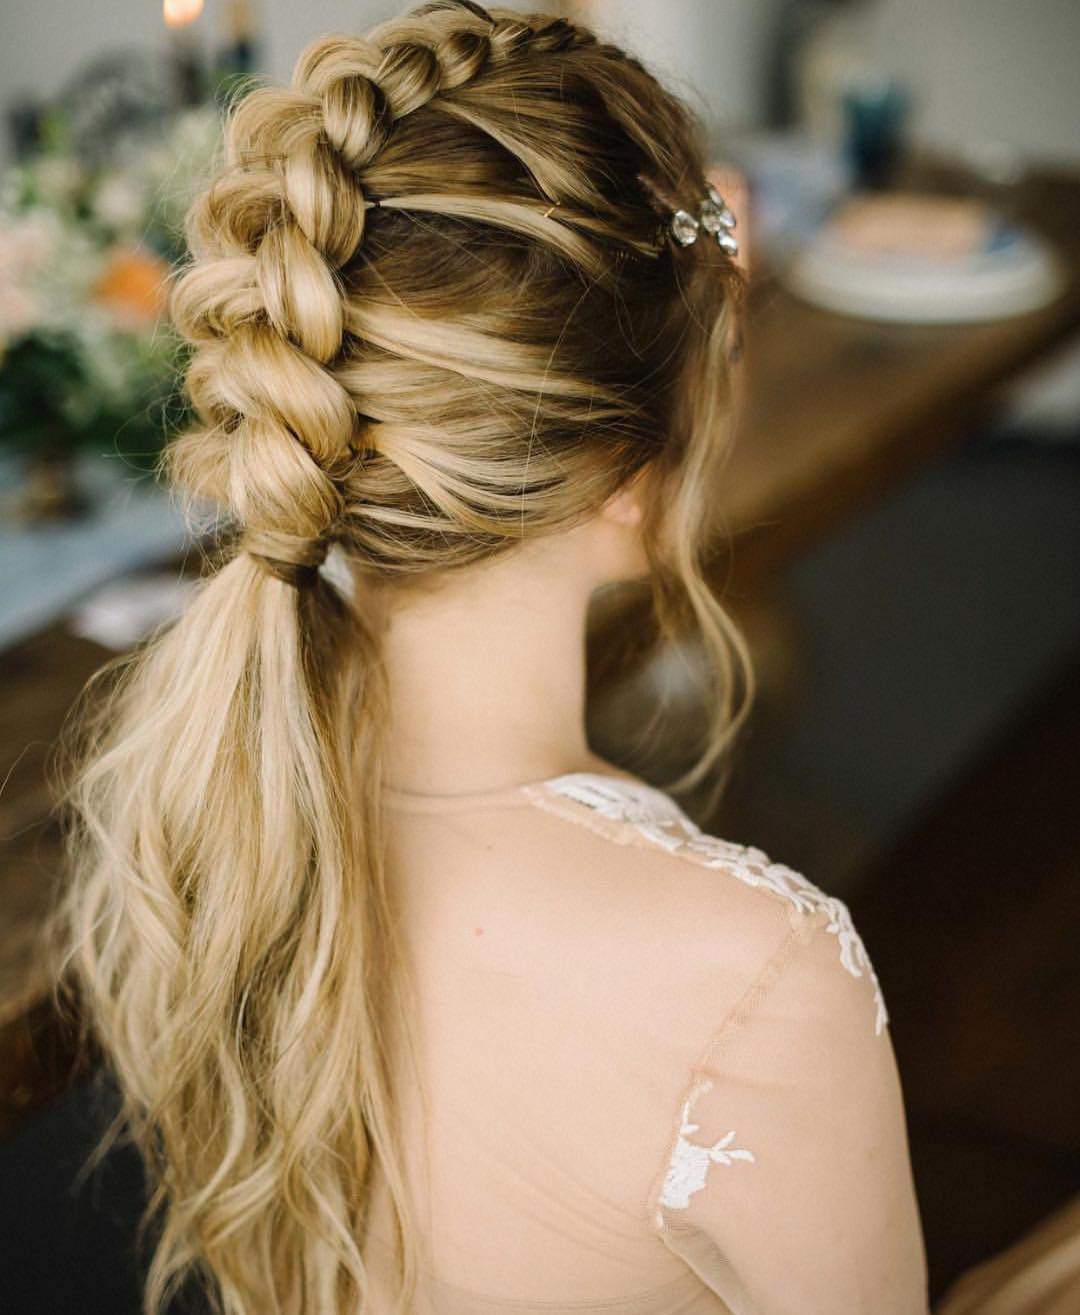 Hairstyles For Long Hair For A Wedding
 10 Braided Hairstyles for Long Hair Weddings Festivals